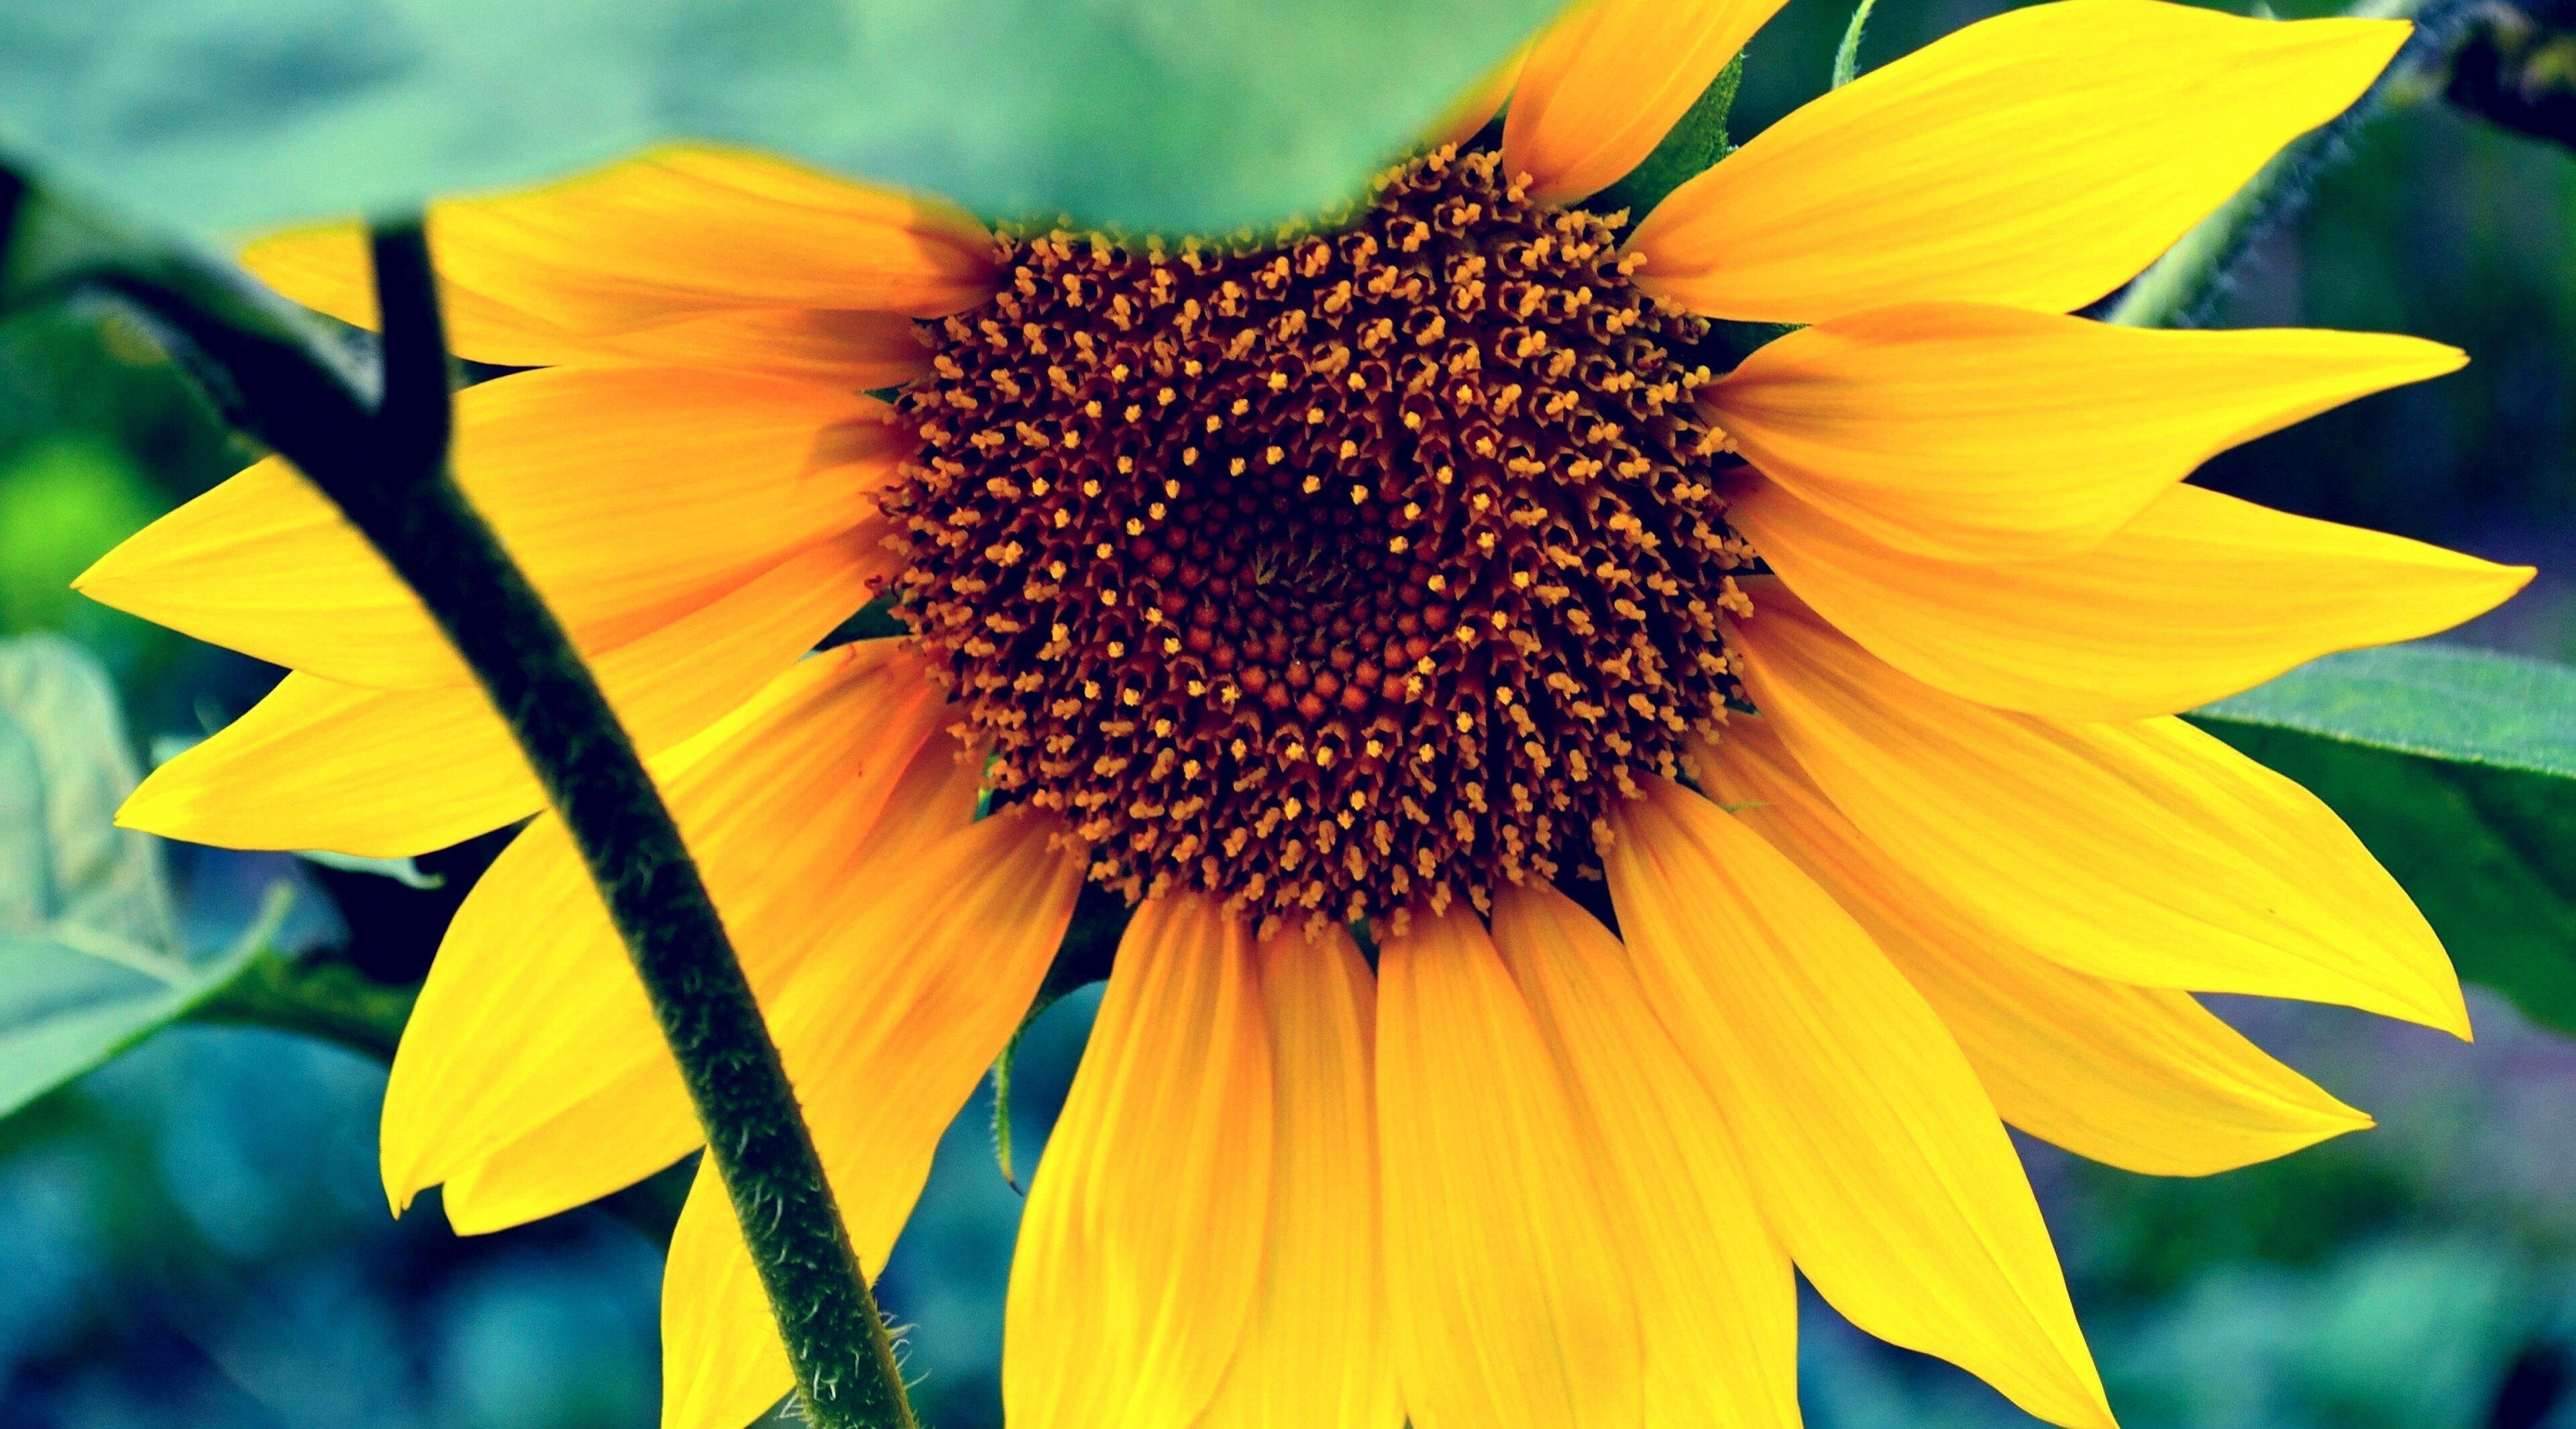 sunflower 4k cool background picture. Wallpaper background, Background picture, Sunflower wallpaper